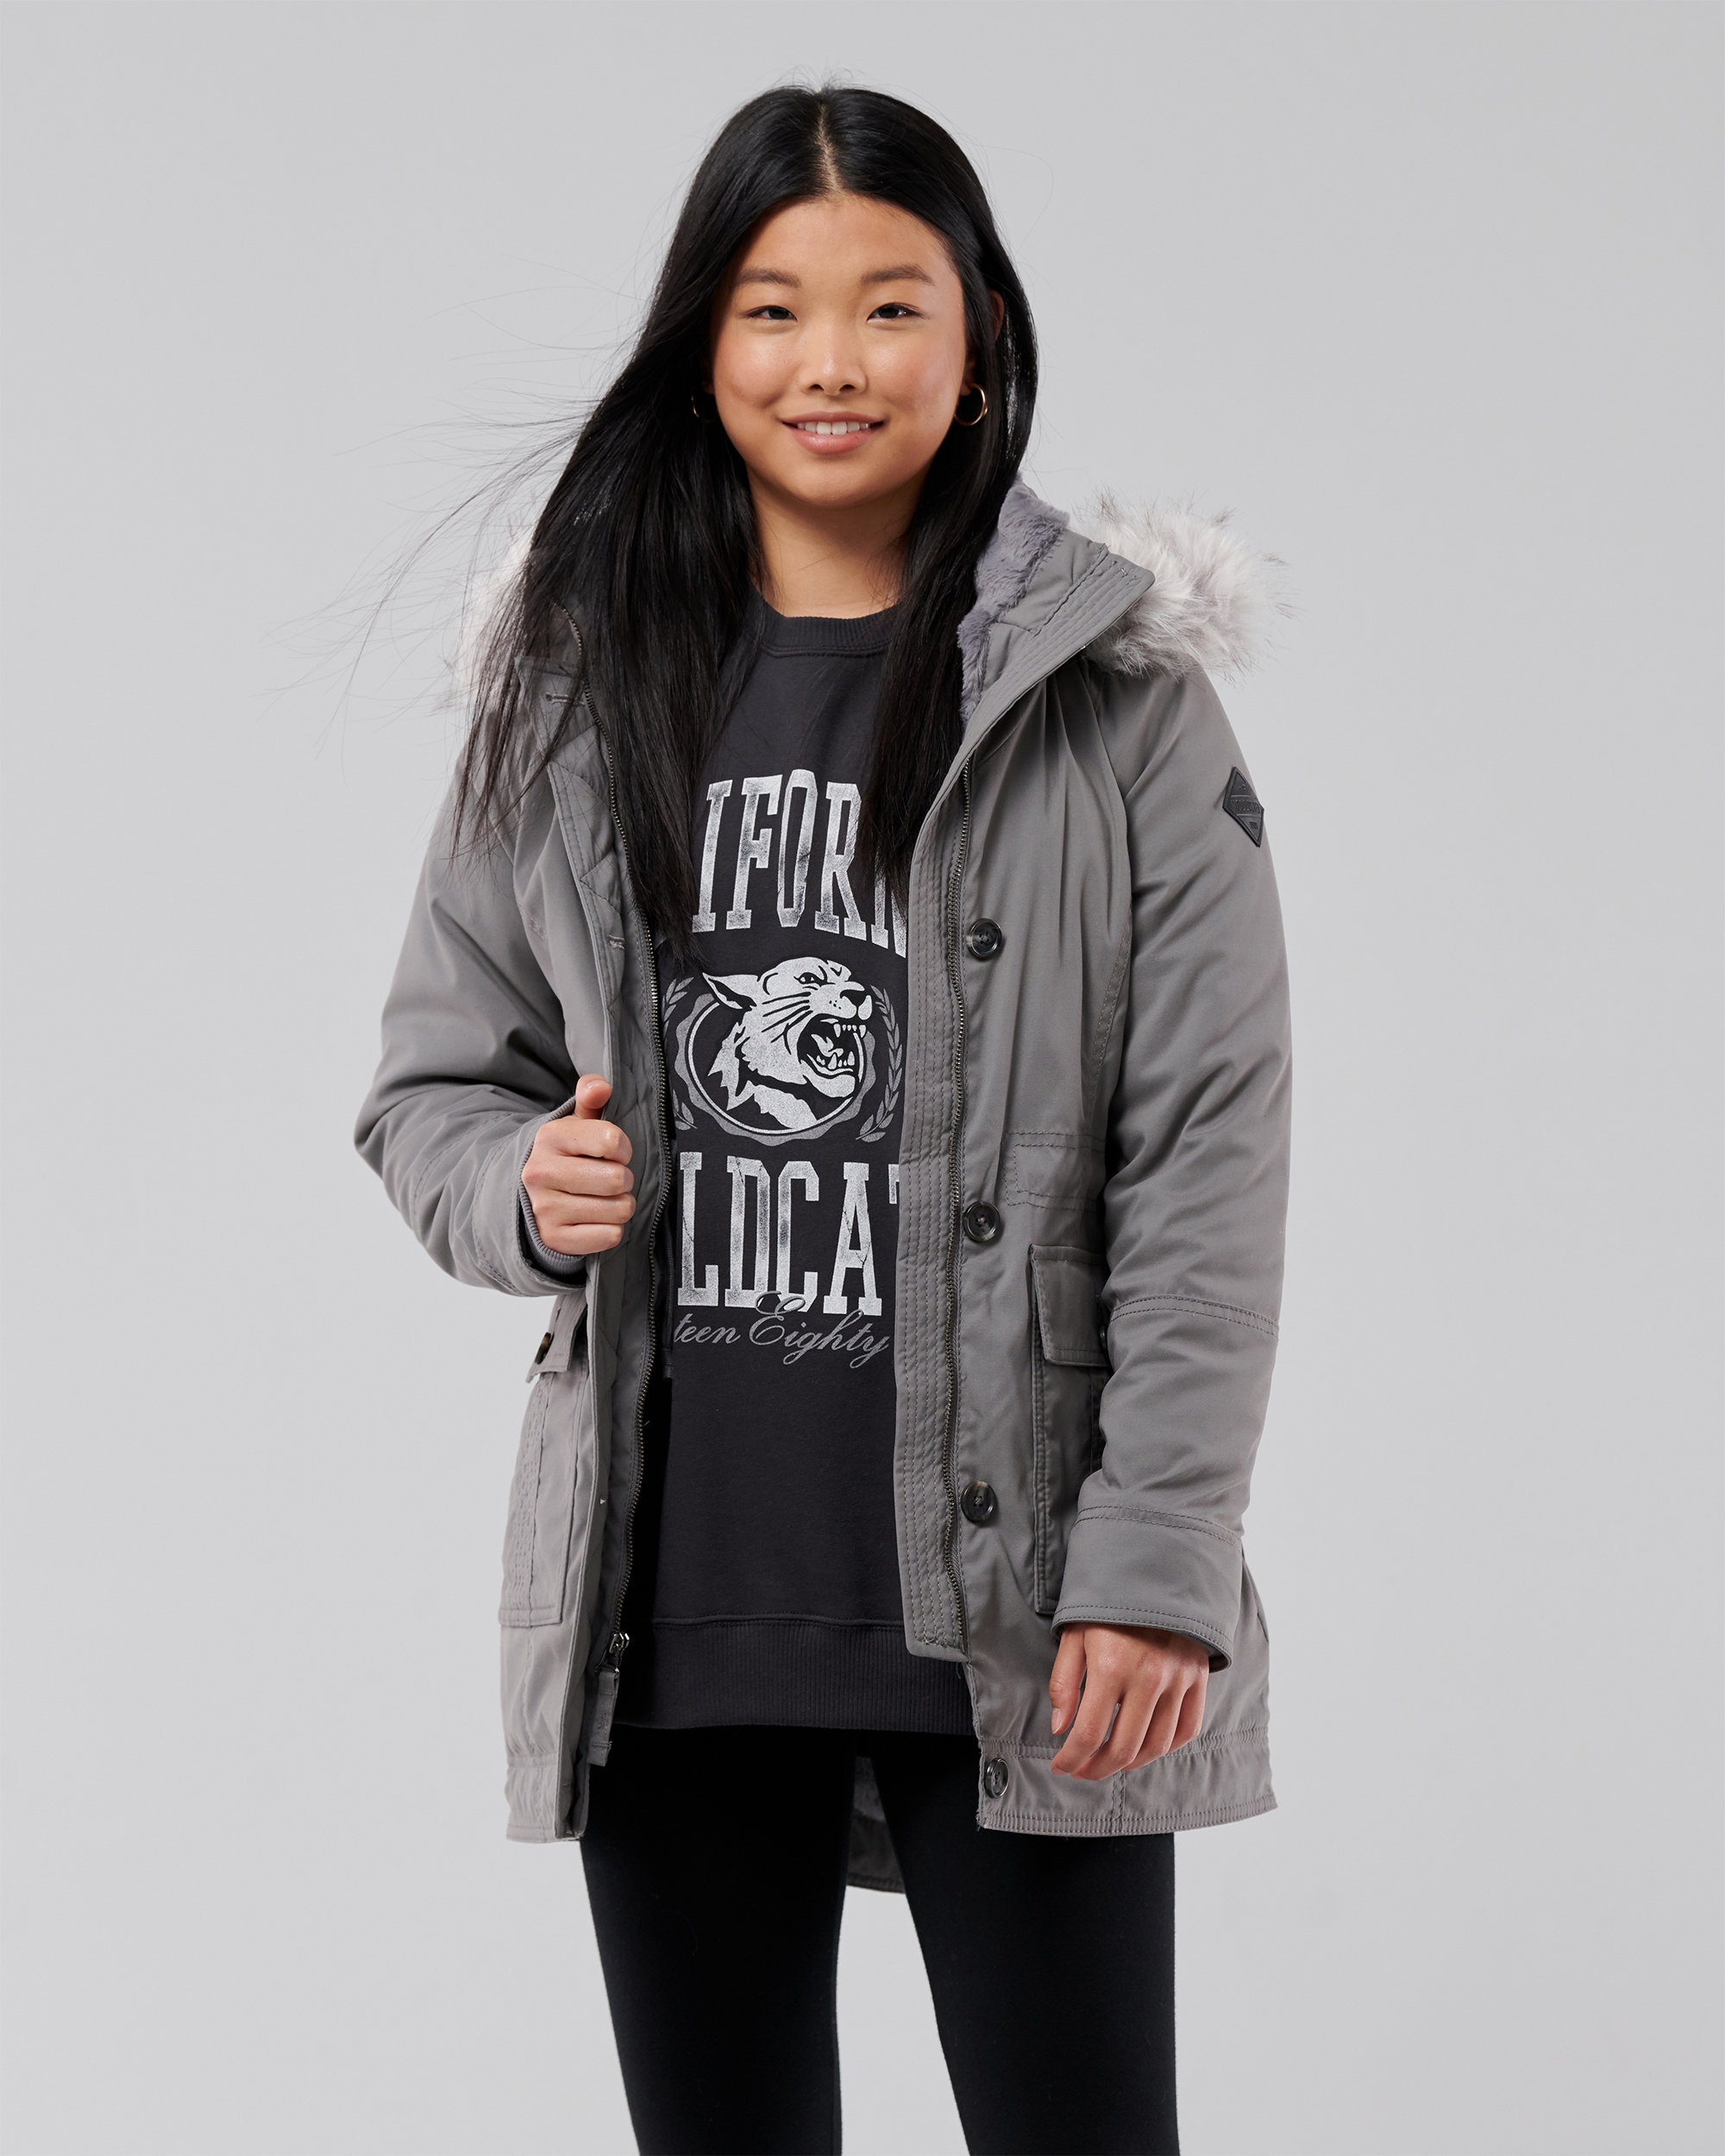 Hollister Teddy Lined Parka in Blue